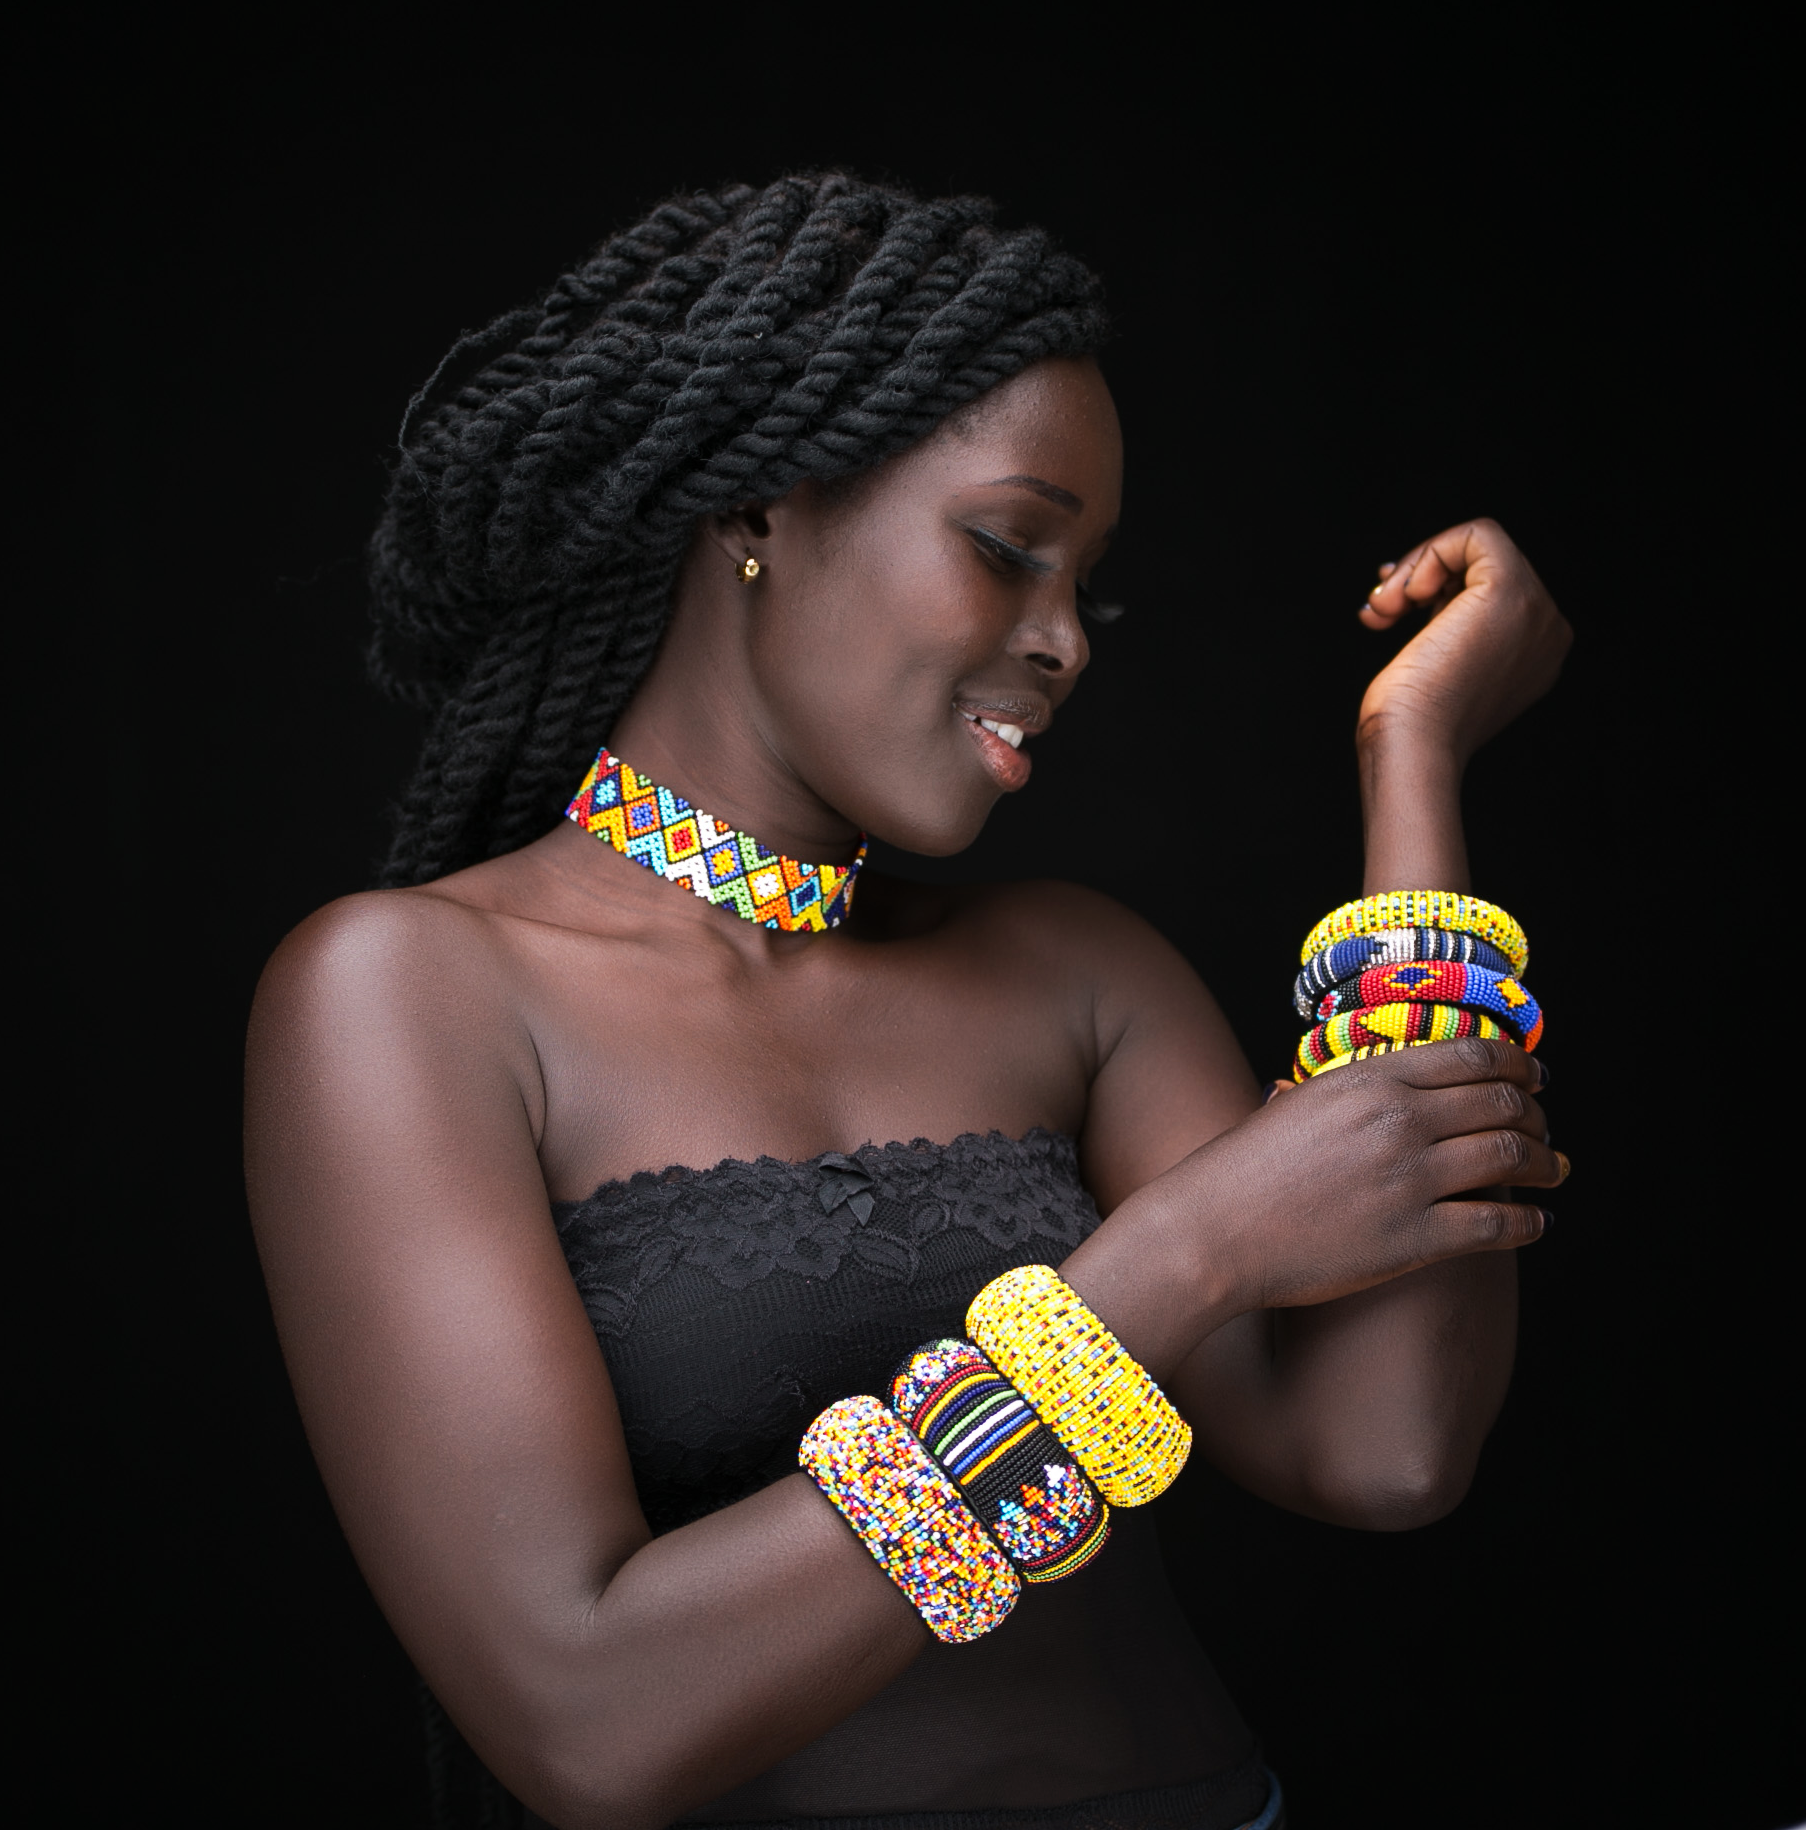 Extra Colorful Beaded Bracelet - Authentic African handicrafts | Clothing, bags, painting, toys & more - CULTURE HUB by Muthoni Unchained